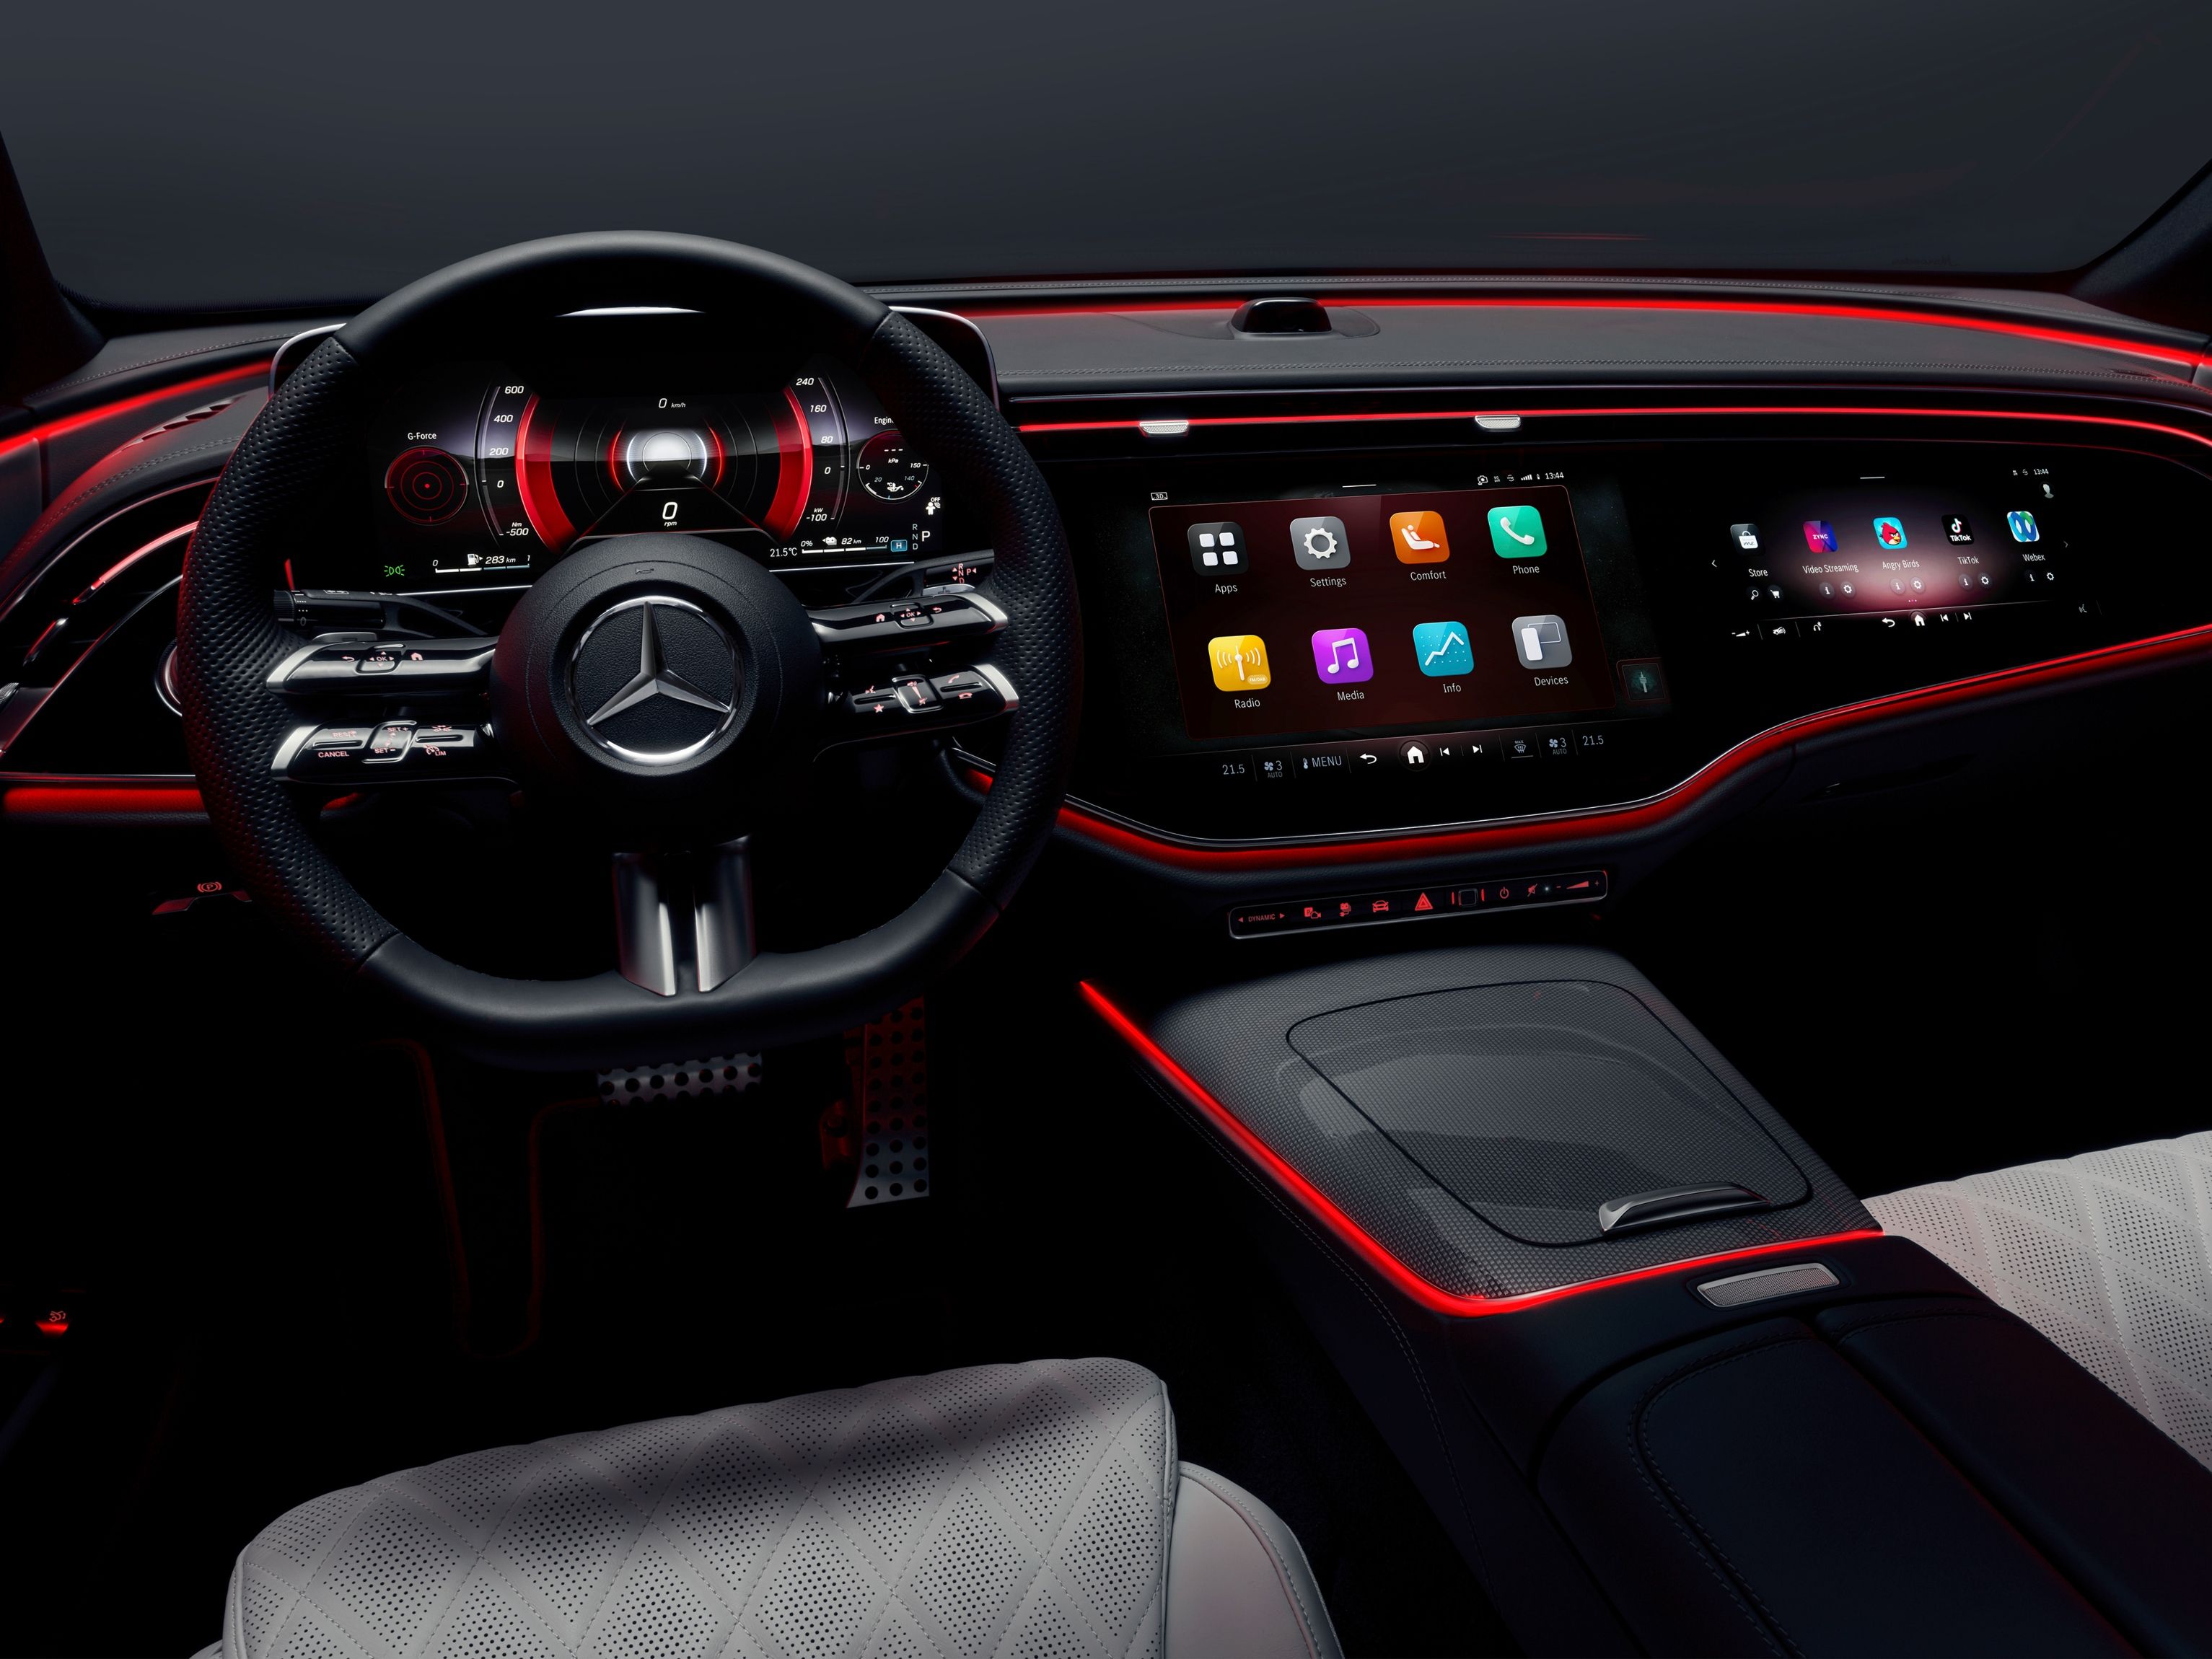 New 2024 MercedesBenz EClass Interior Pictures Officially Revealed